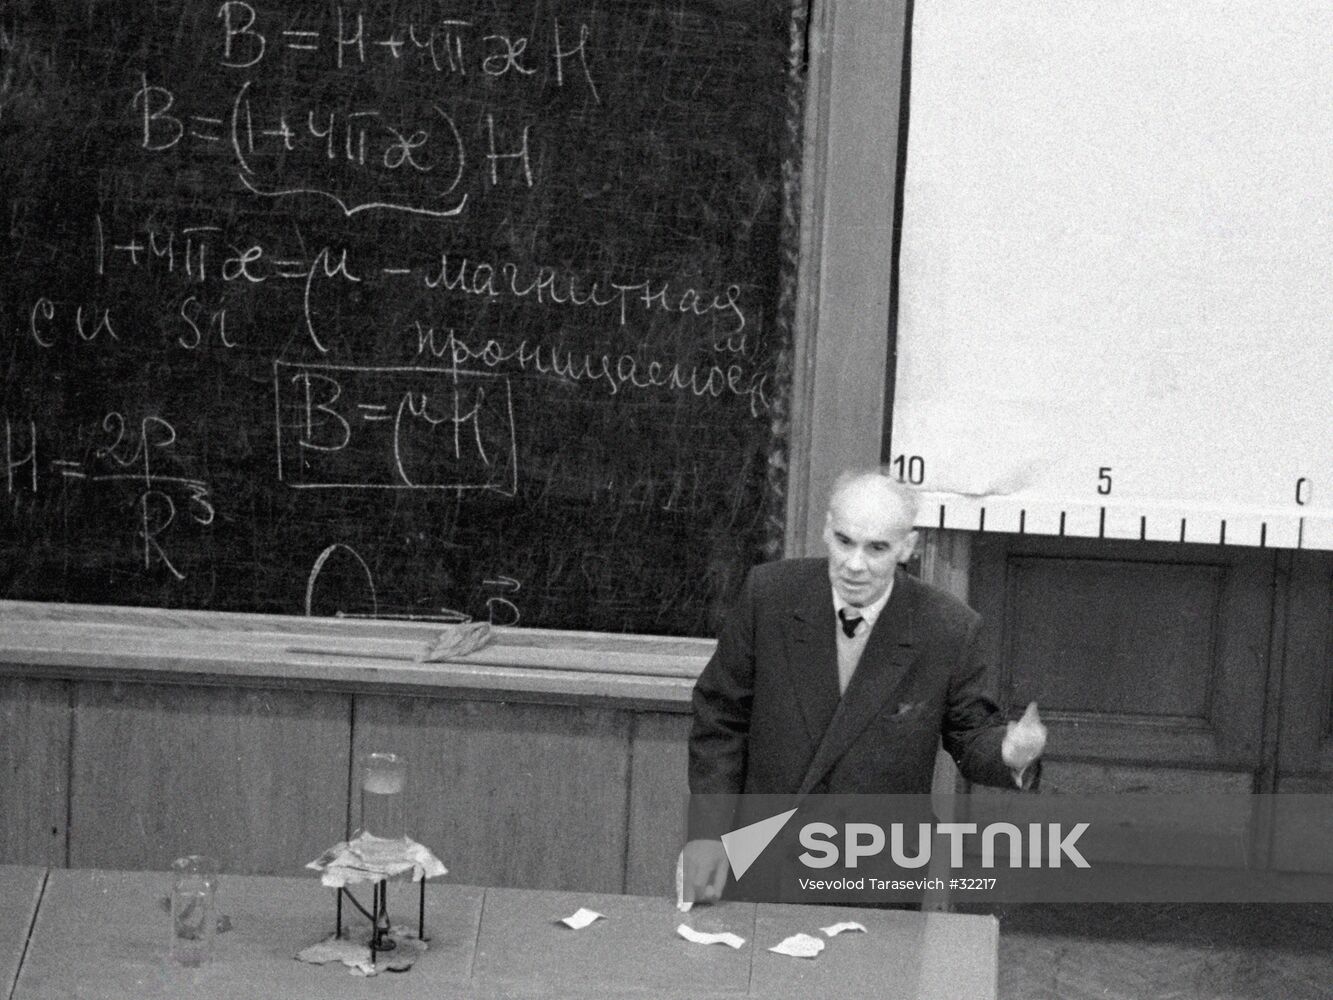 ACADEMICIAN KIKOIN MOSCOW STATE UNIVERSITY LECTURE